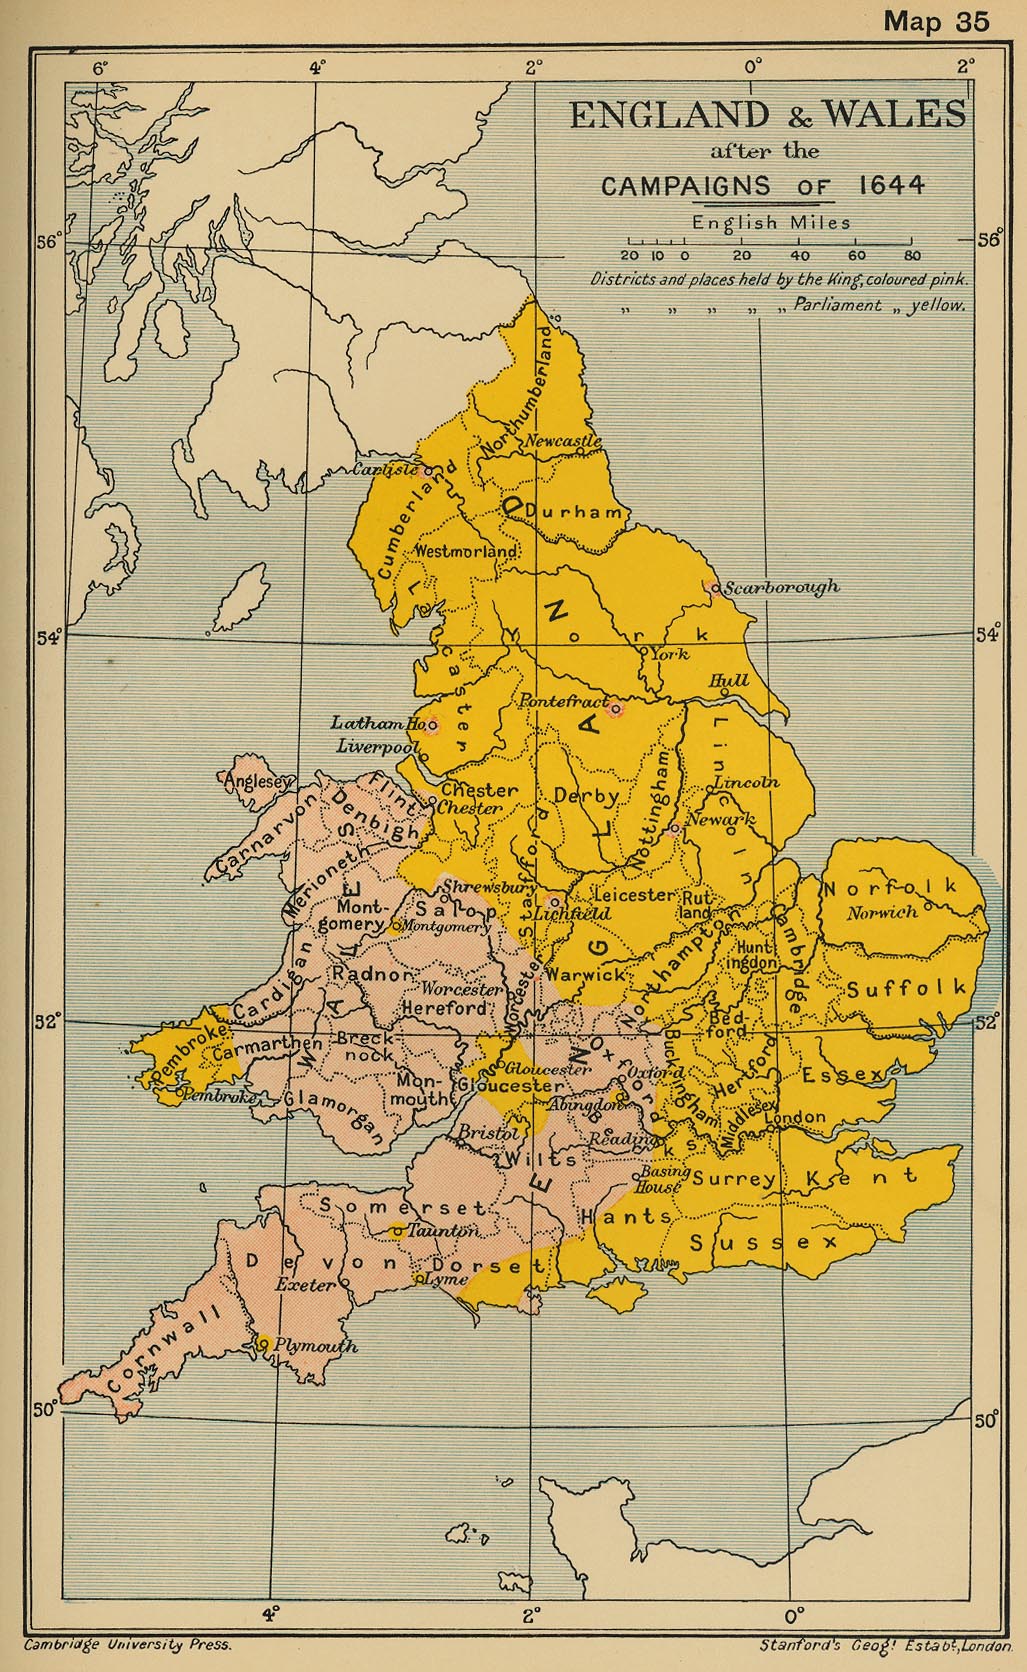 Map of England and Wales after the campaigns of 1644